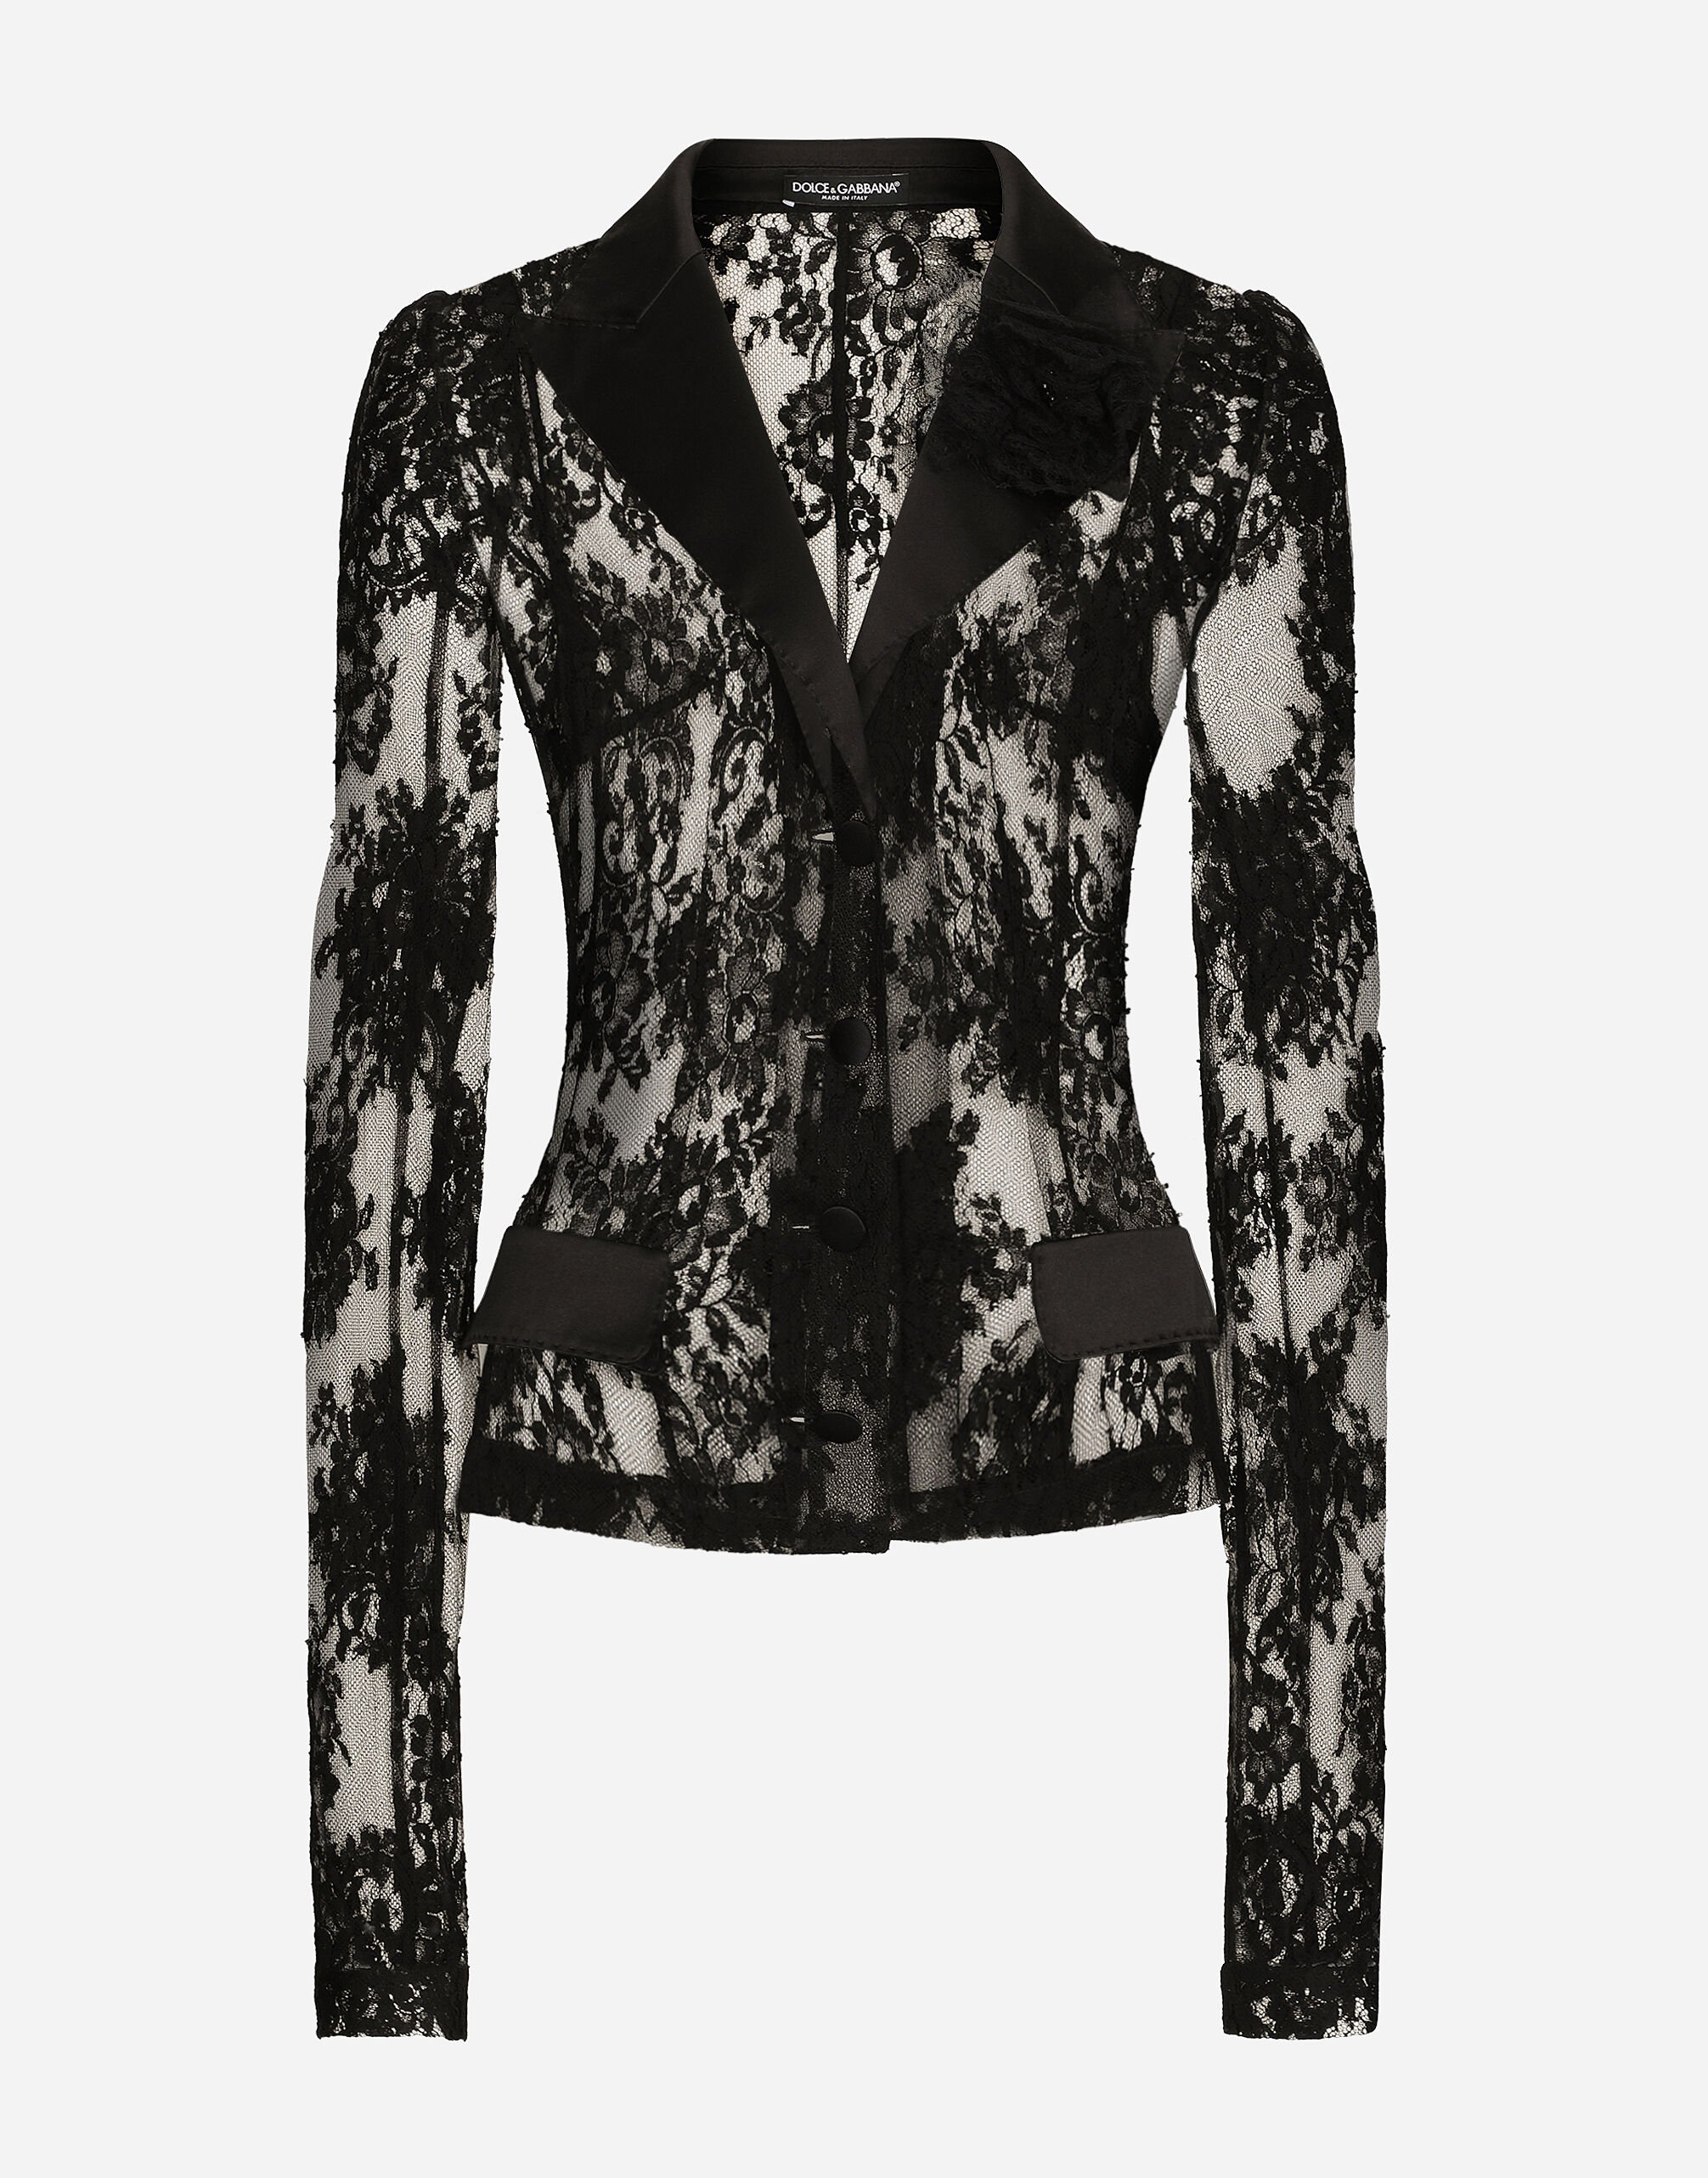 Floral lace jacket with satin details